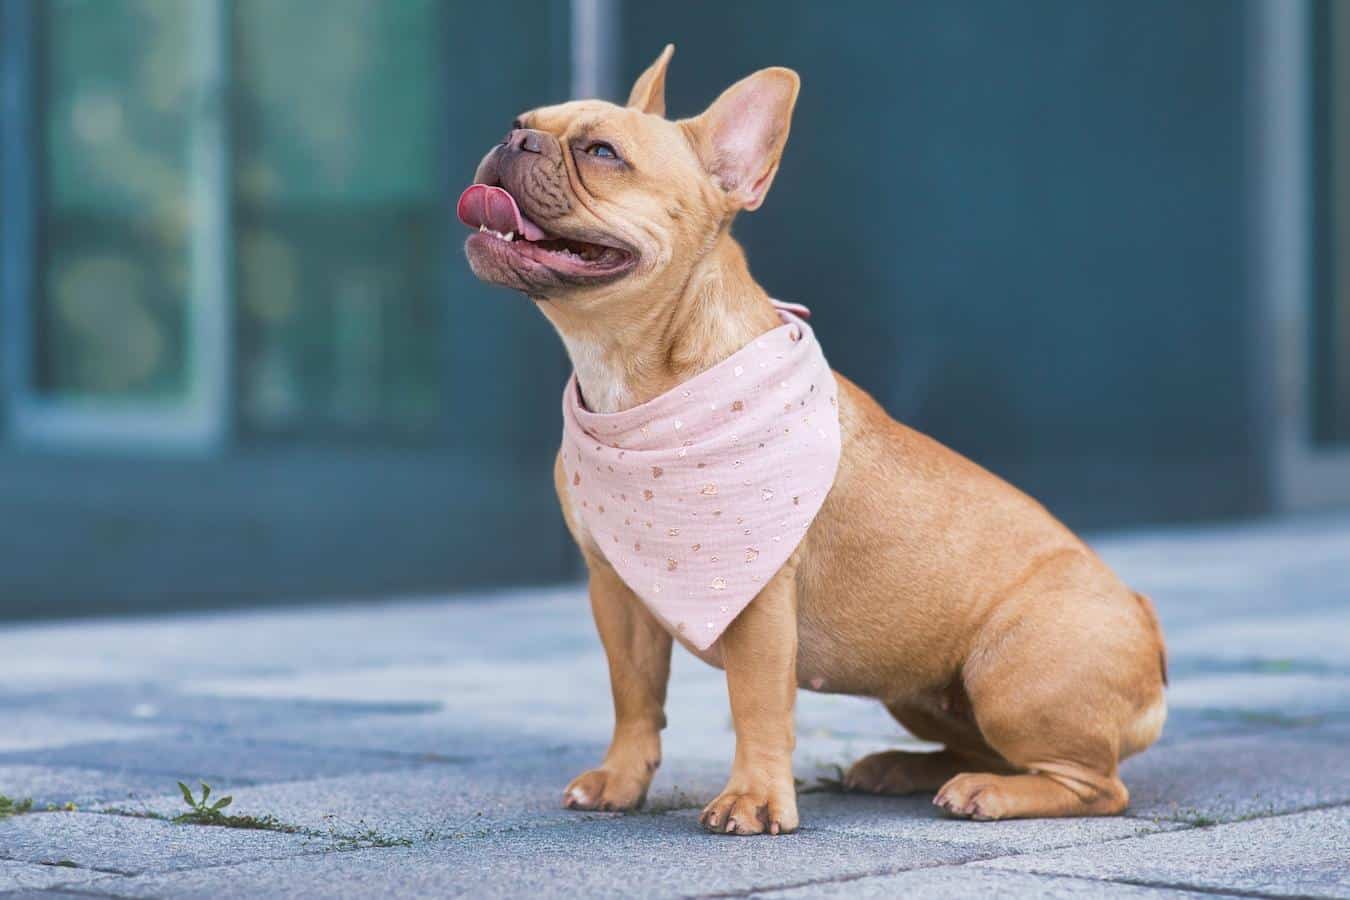 dog with a pink bandana body's tissues increased respiratory effort accurate diagnosis other symptoms flattened ears breathing heavily perfectly normal dog pant rest reluctance oxygen therapy urgent veterinary care normal respiratory rate pot bellied appearance